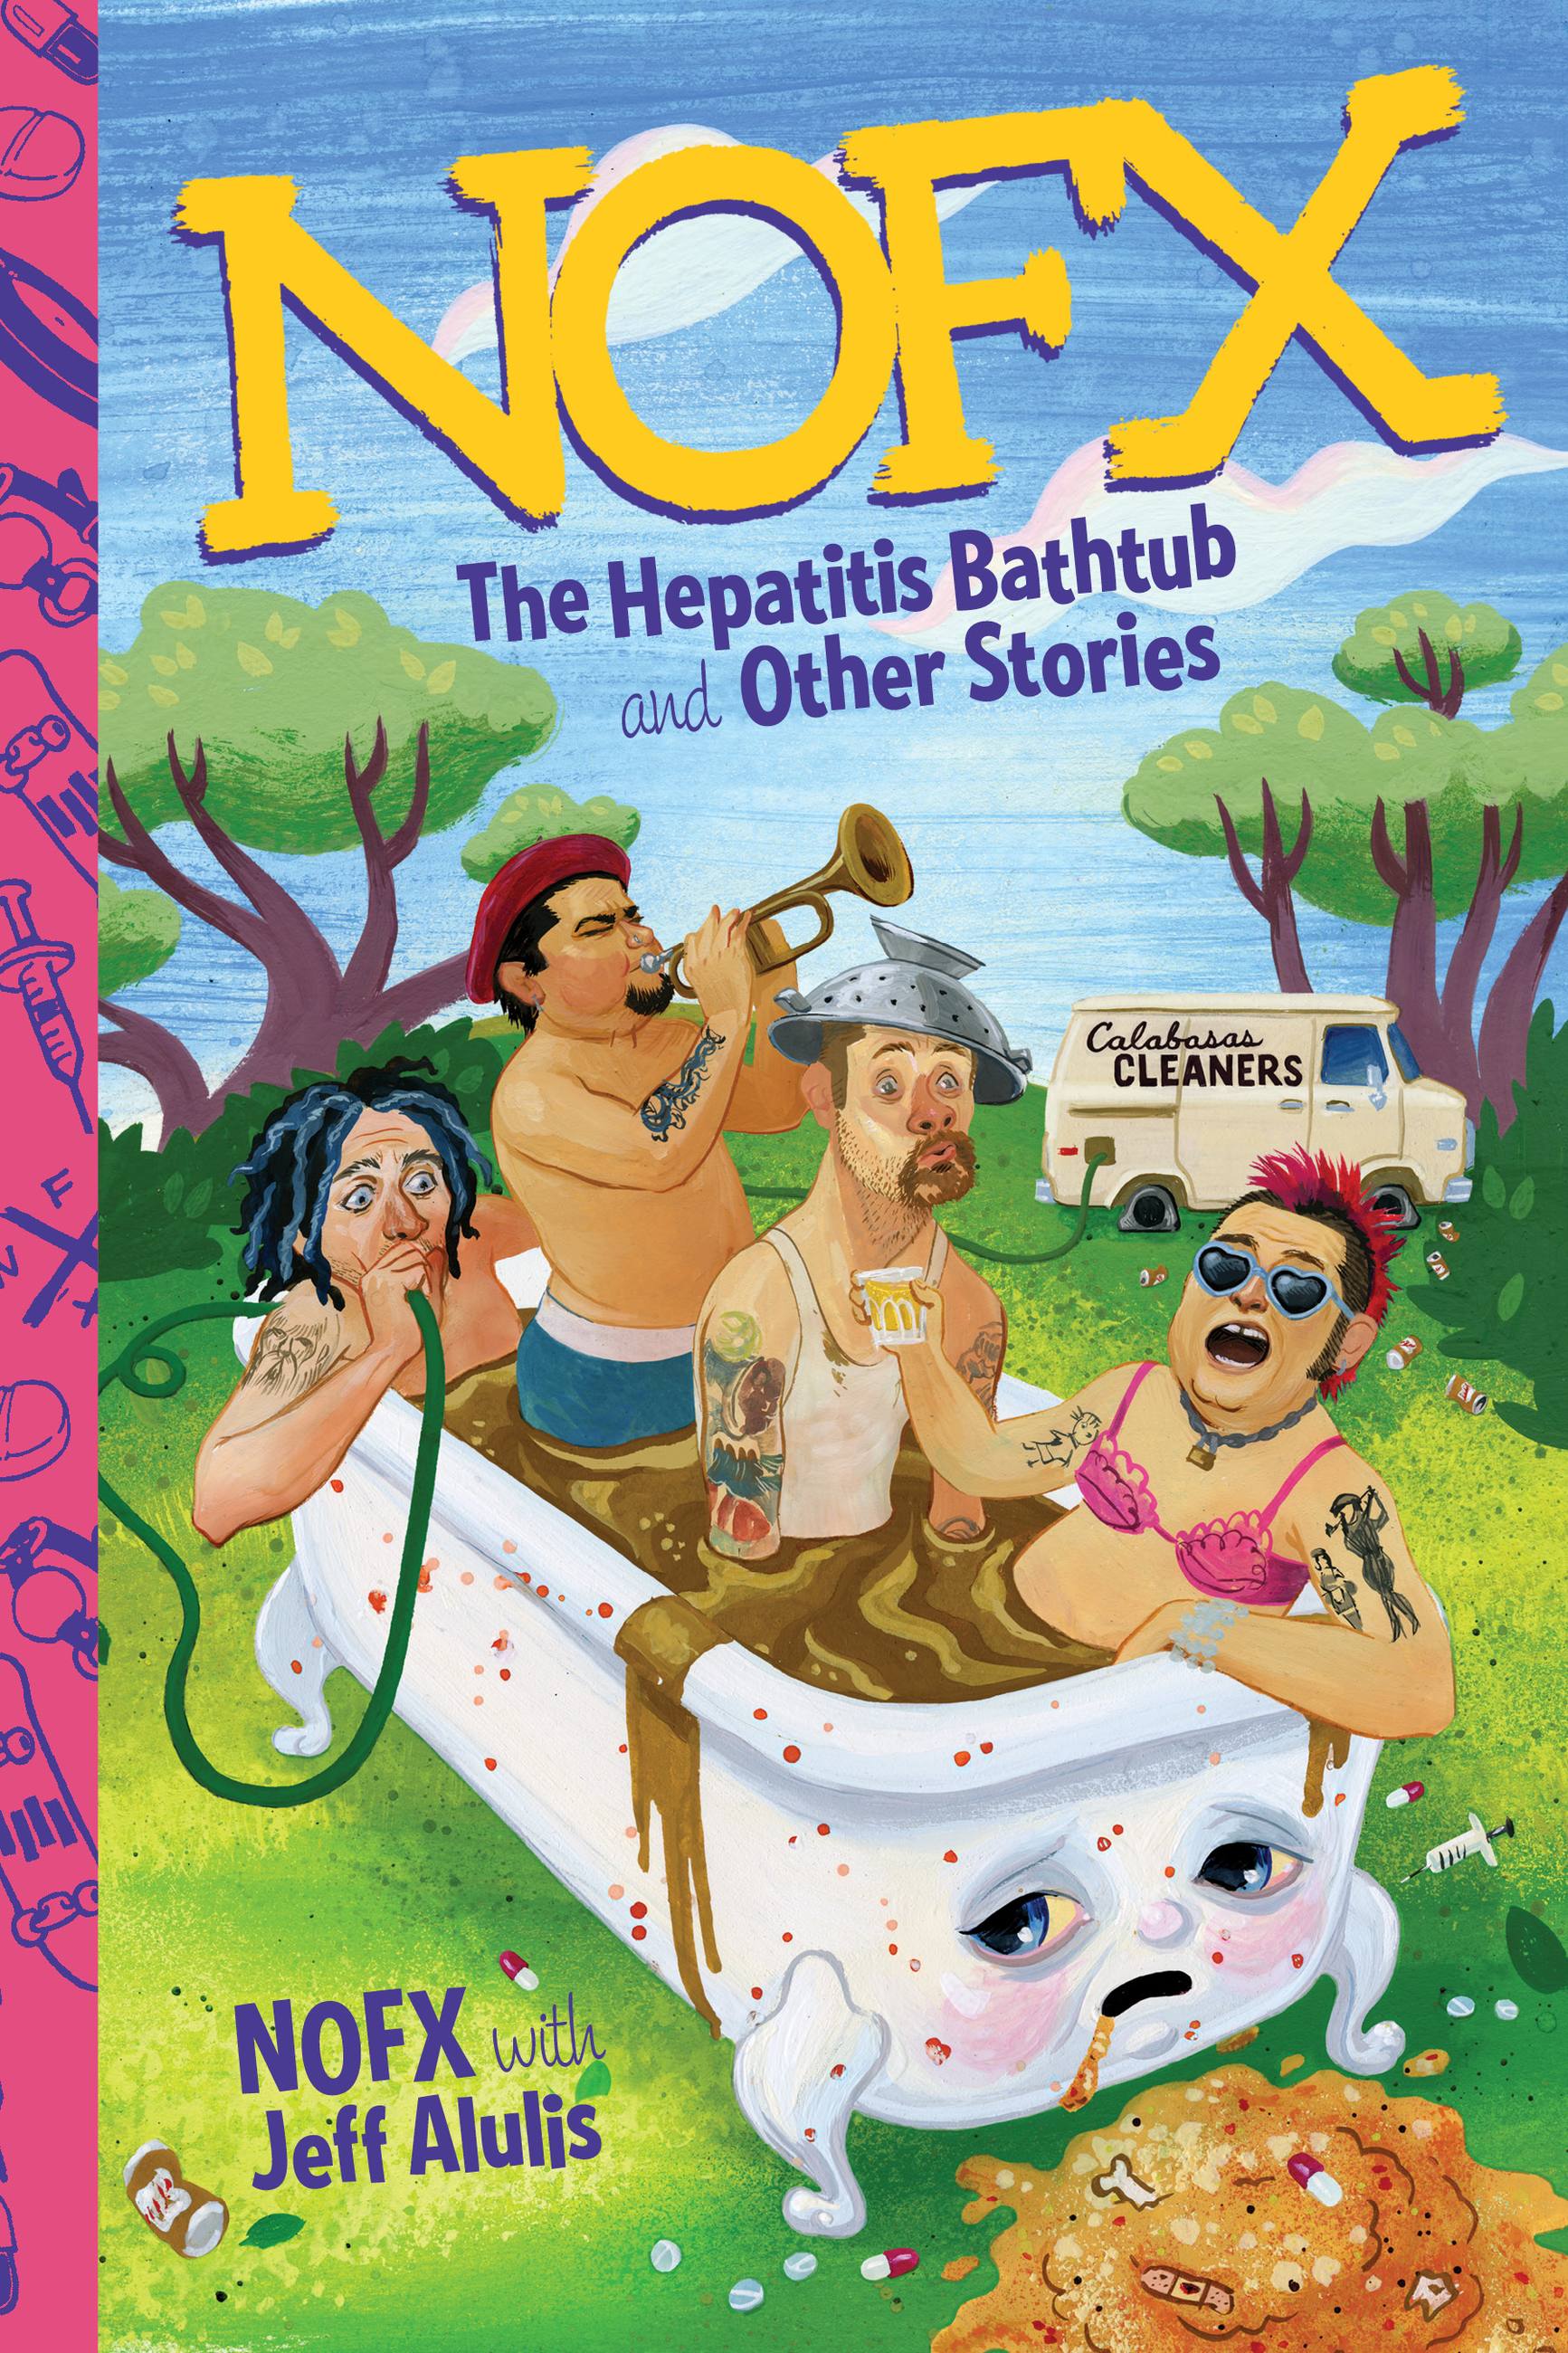 Forced Breastfeeding Porn - NOFX by NOFX | Hachette Book Group